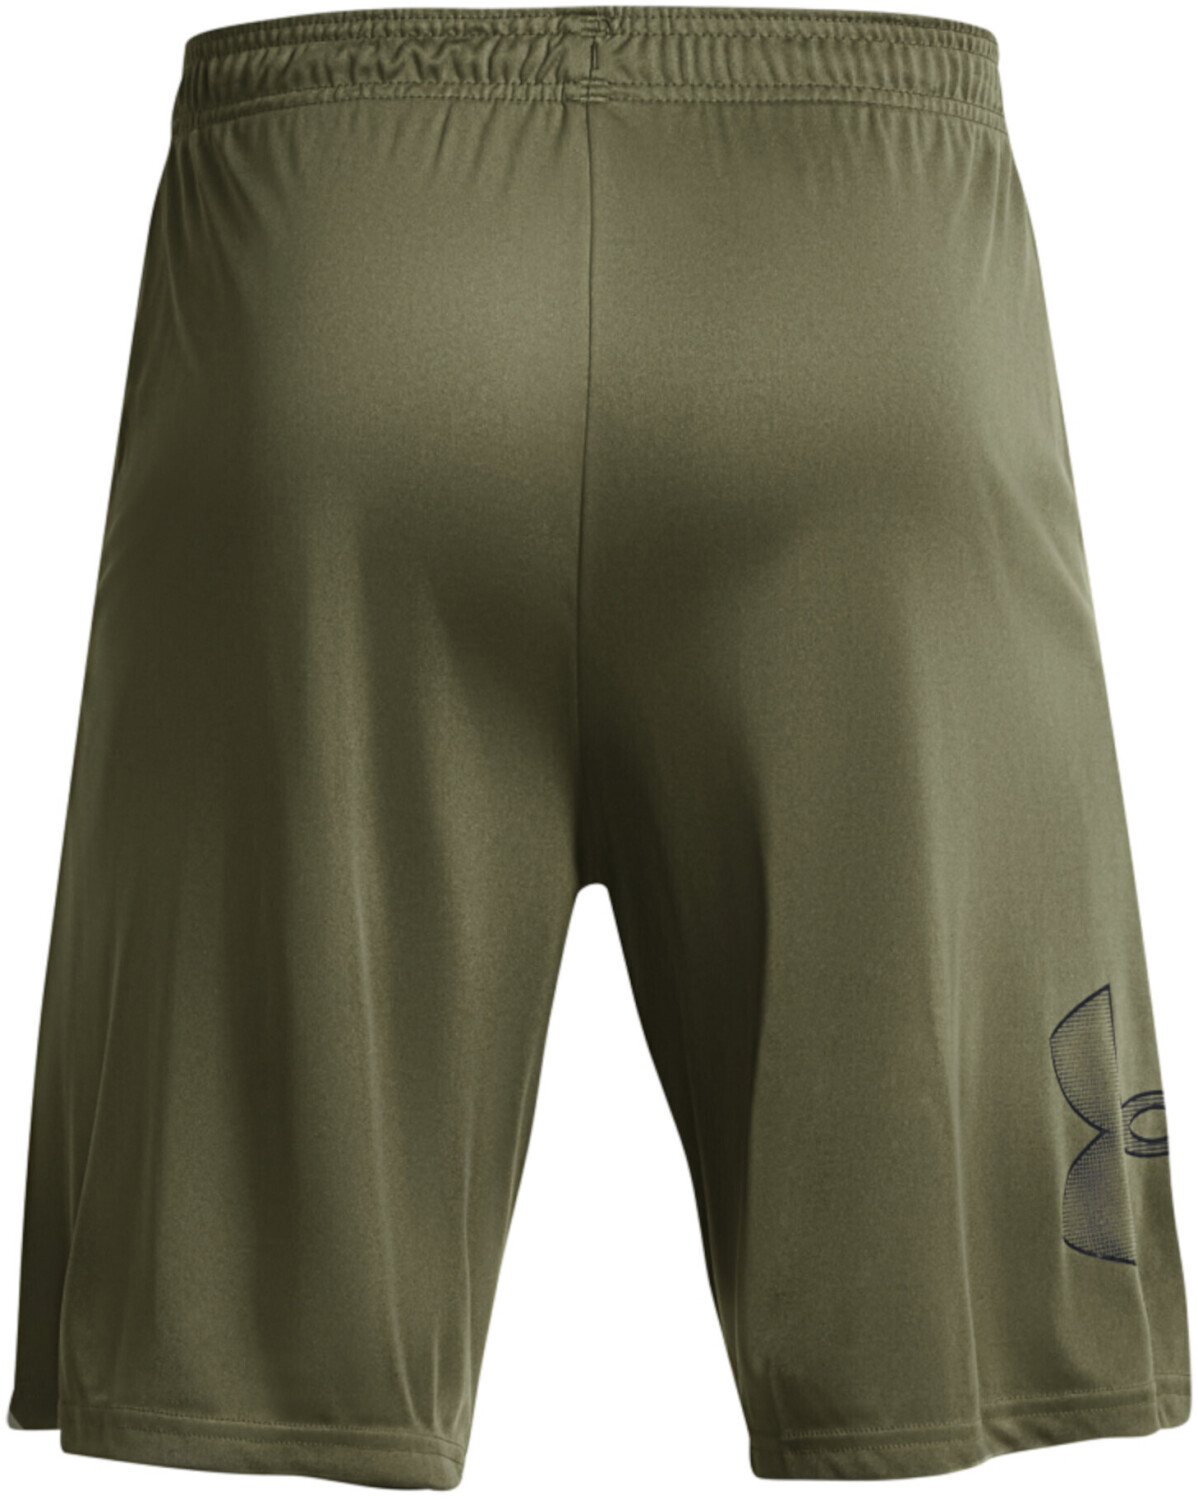 Buy Under Armour UA Tech Graphic Shorts (1306443) marine od green from  £16.00 (Today) – Best Deals on